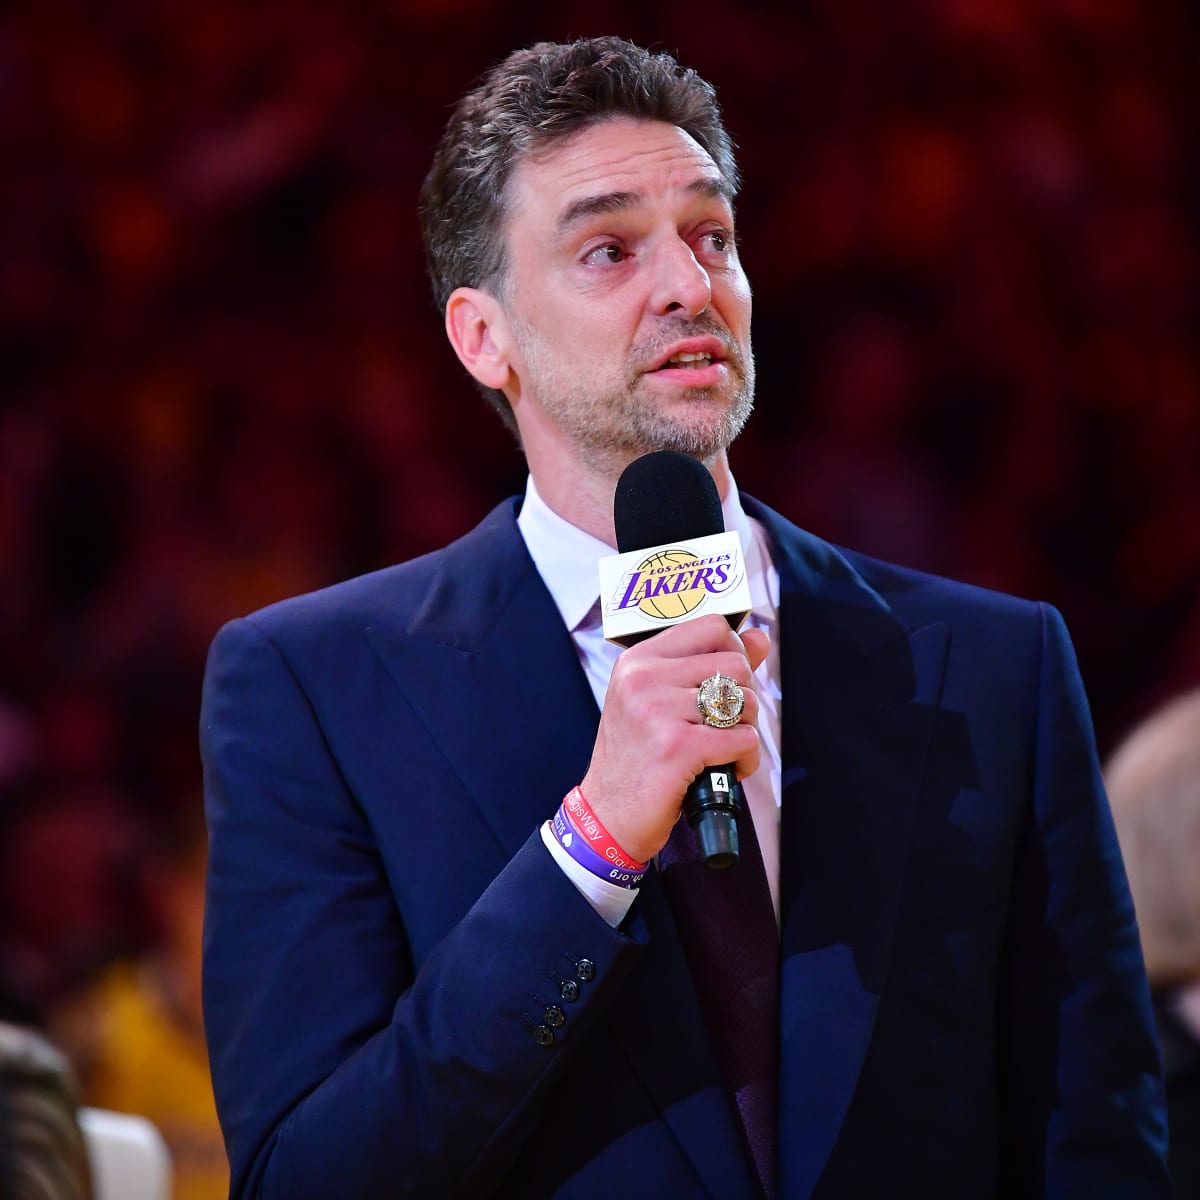 ESPN on X: Pau Gasol shared his thoughts on getting his jersey